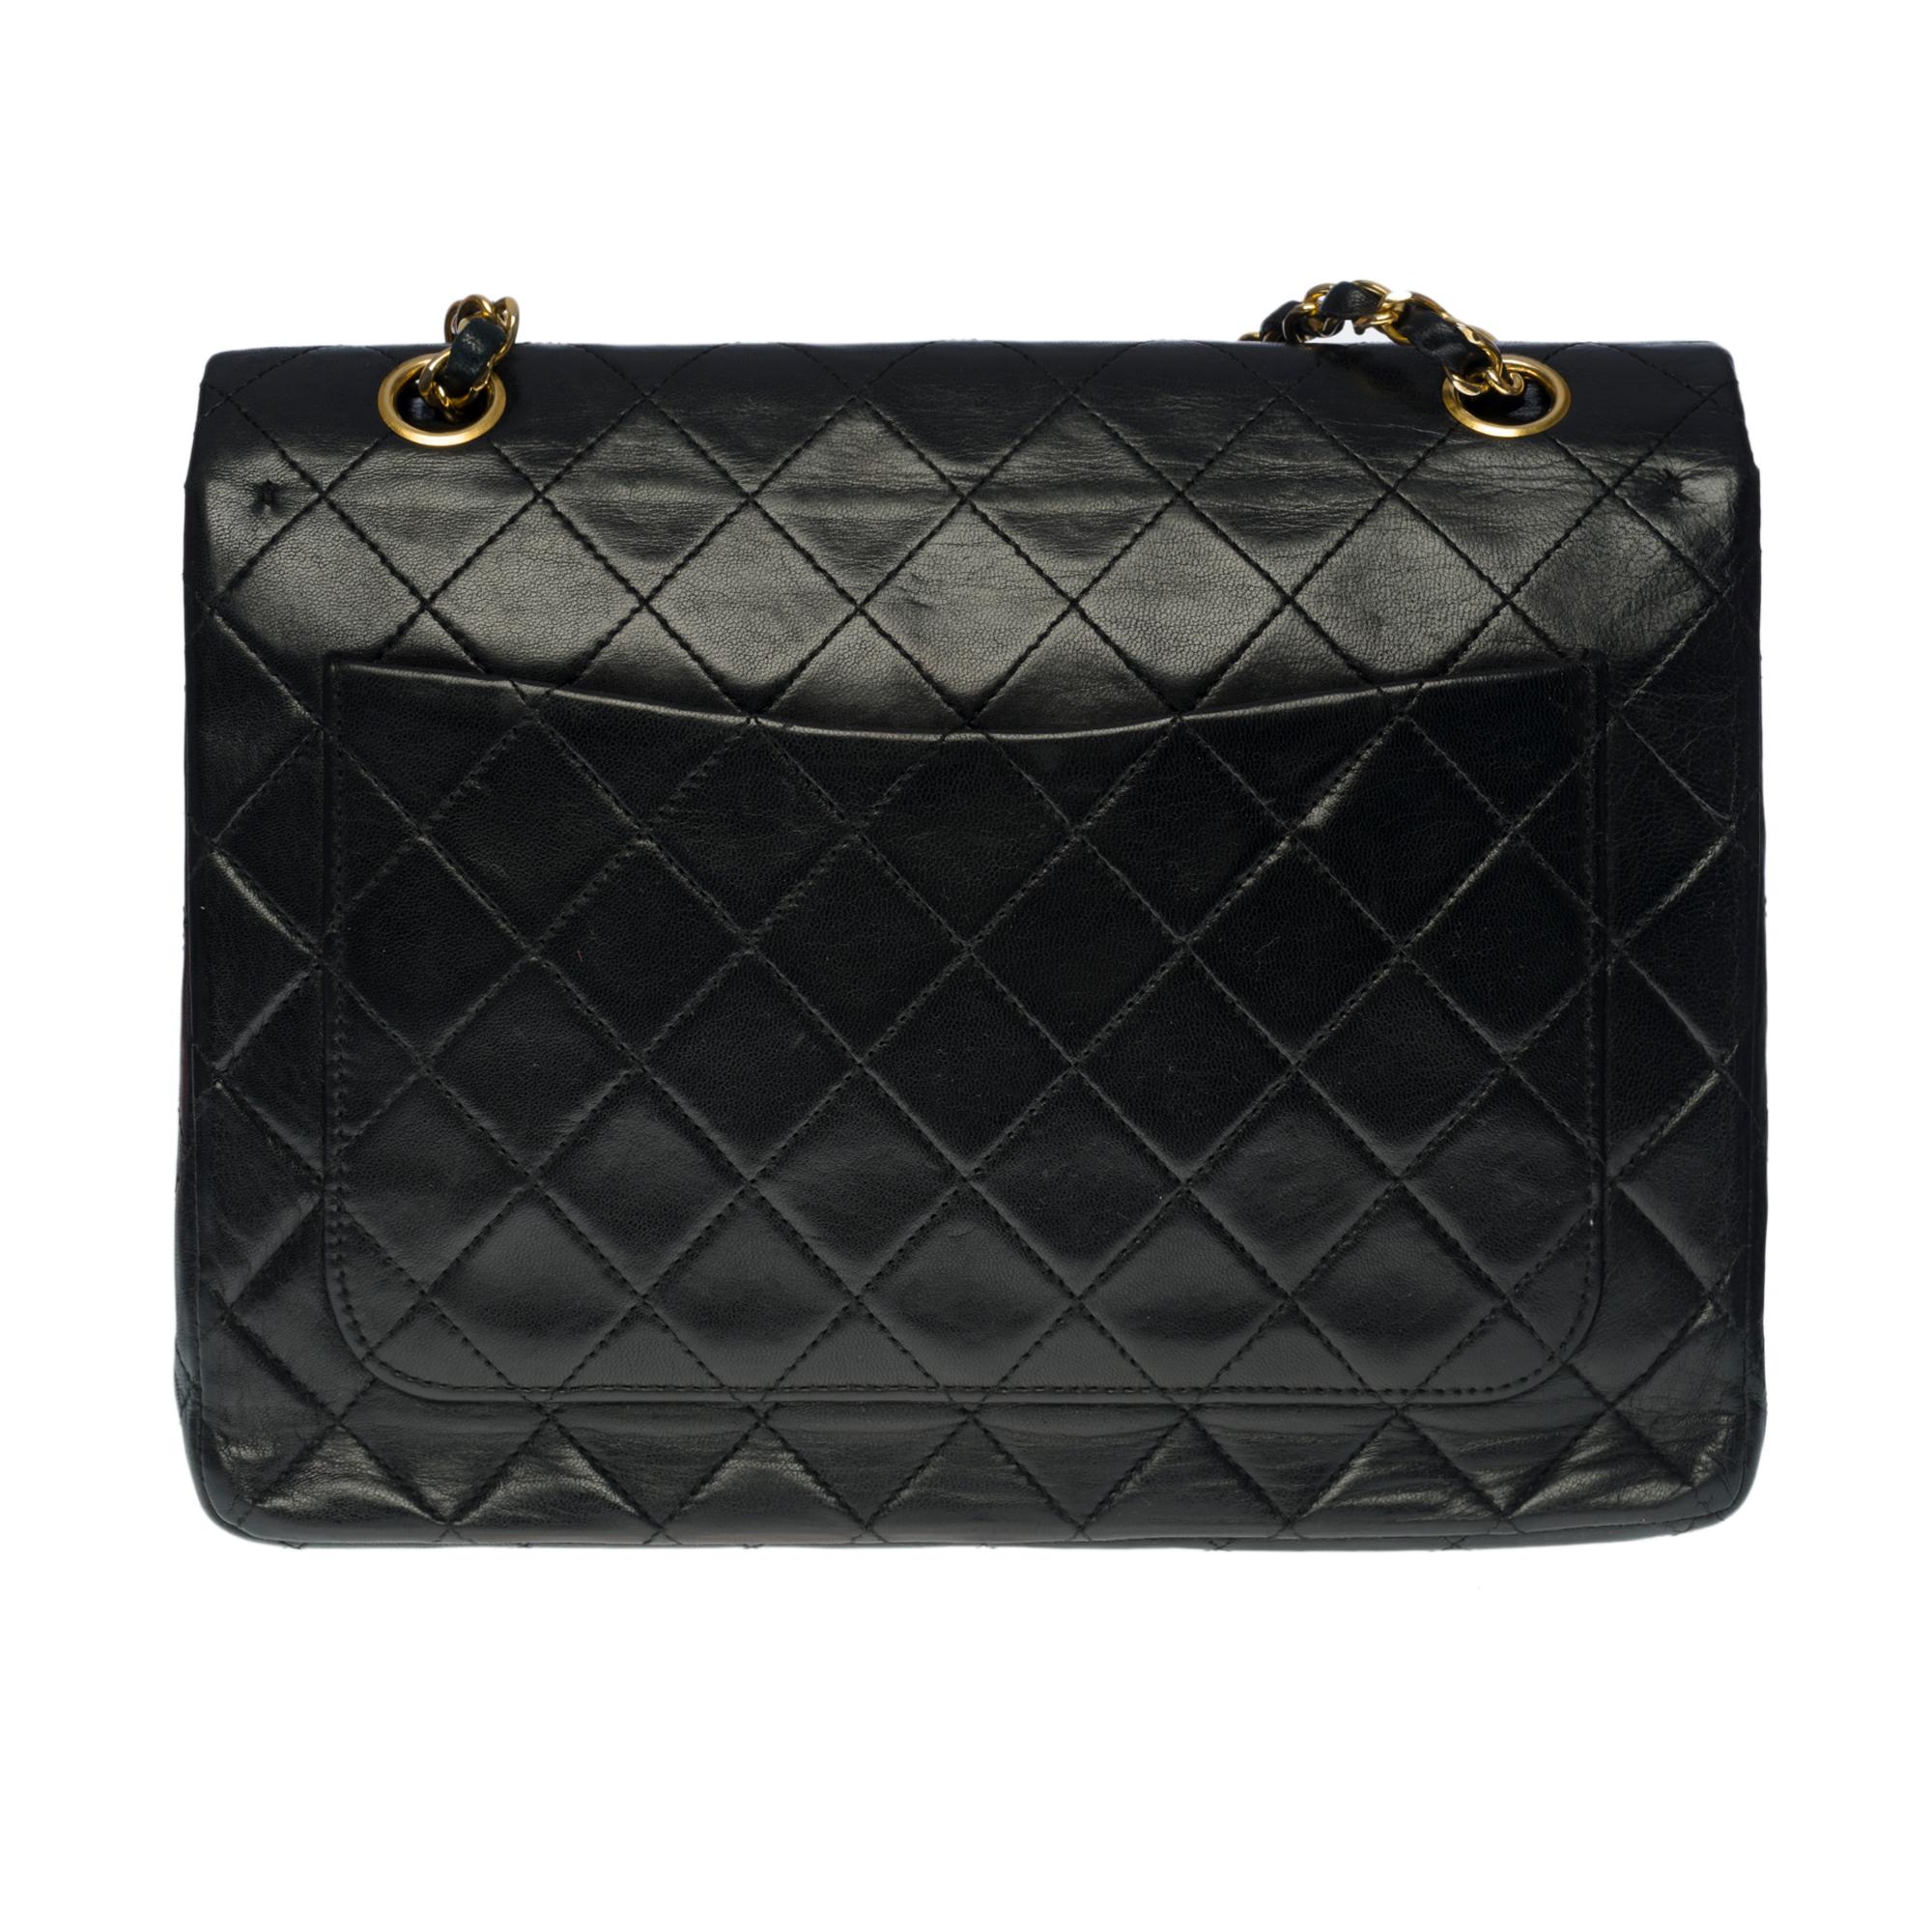 The coveted Chanel Timeless/Classic medium 25cm bag with double flap in black quilted leather, gold-plated hardware, gold-plated chain interlaced with black leather for a shoulder and shoulder strap

Backpack pocket
Flap closure with gold CC logo